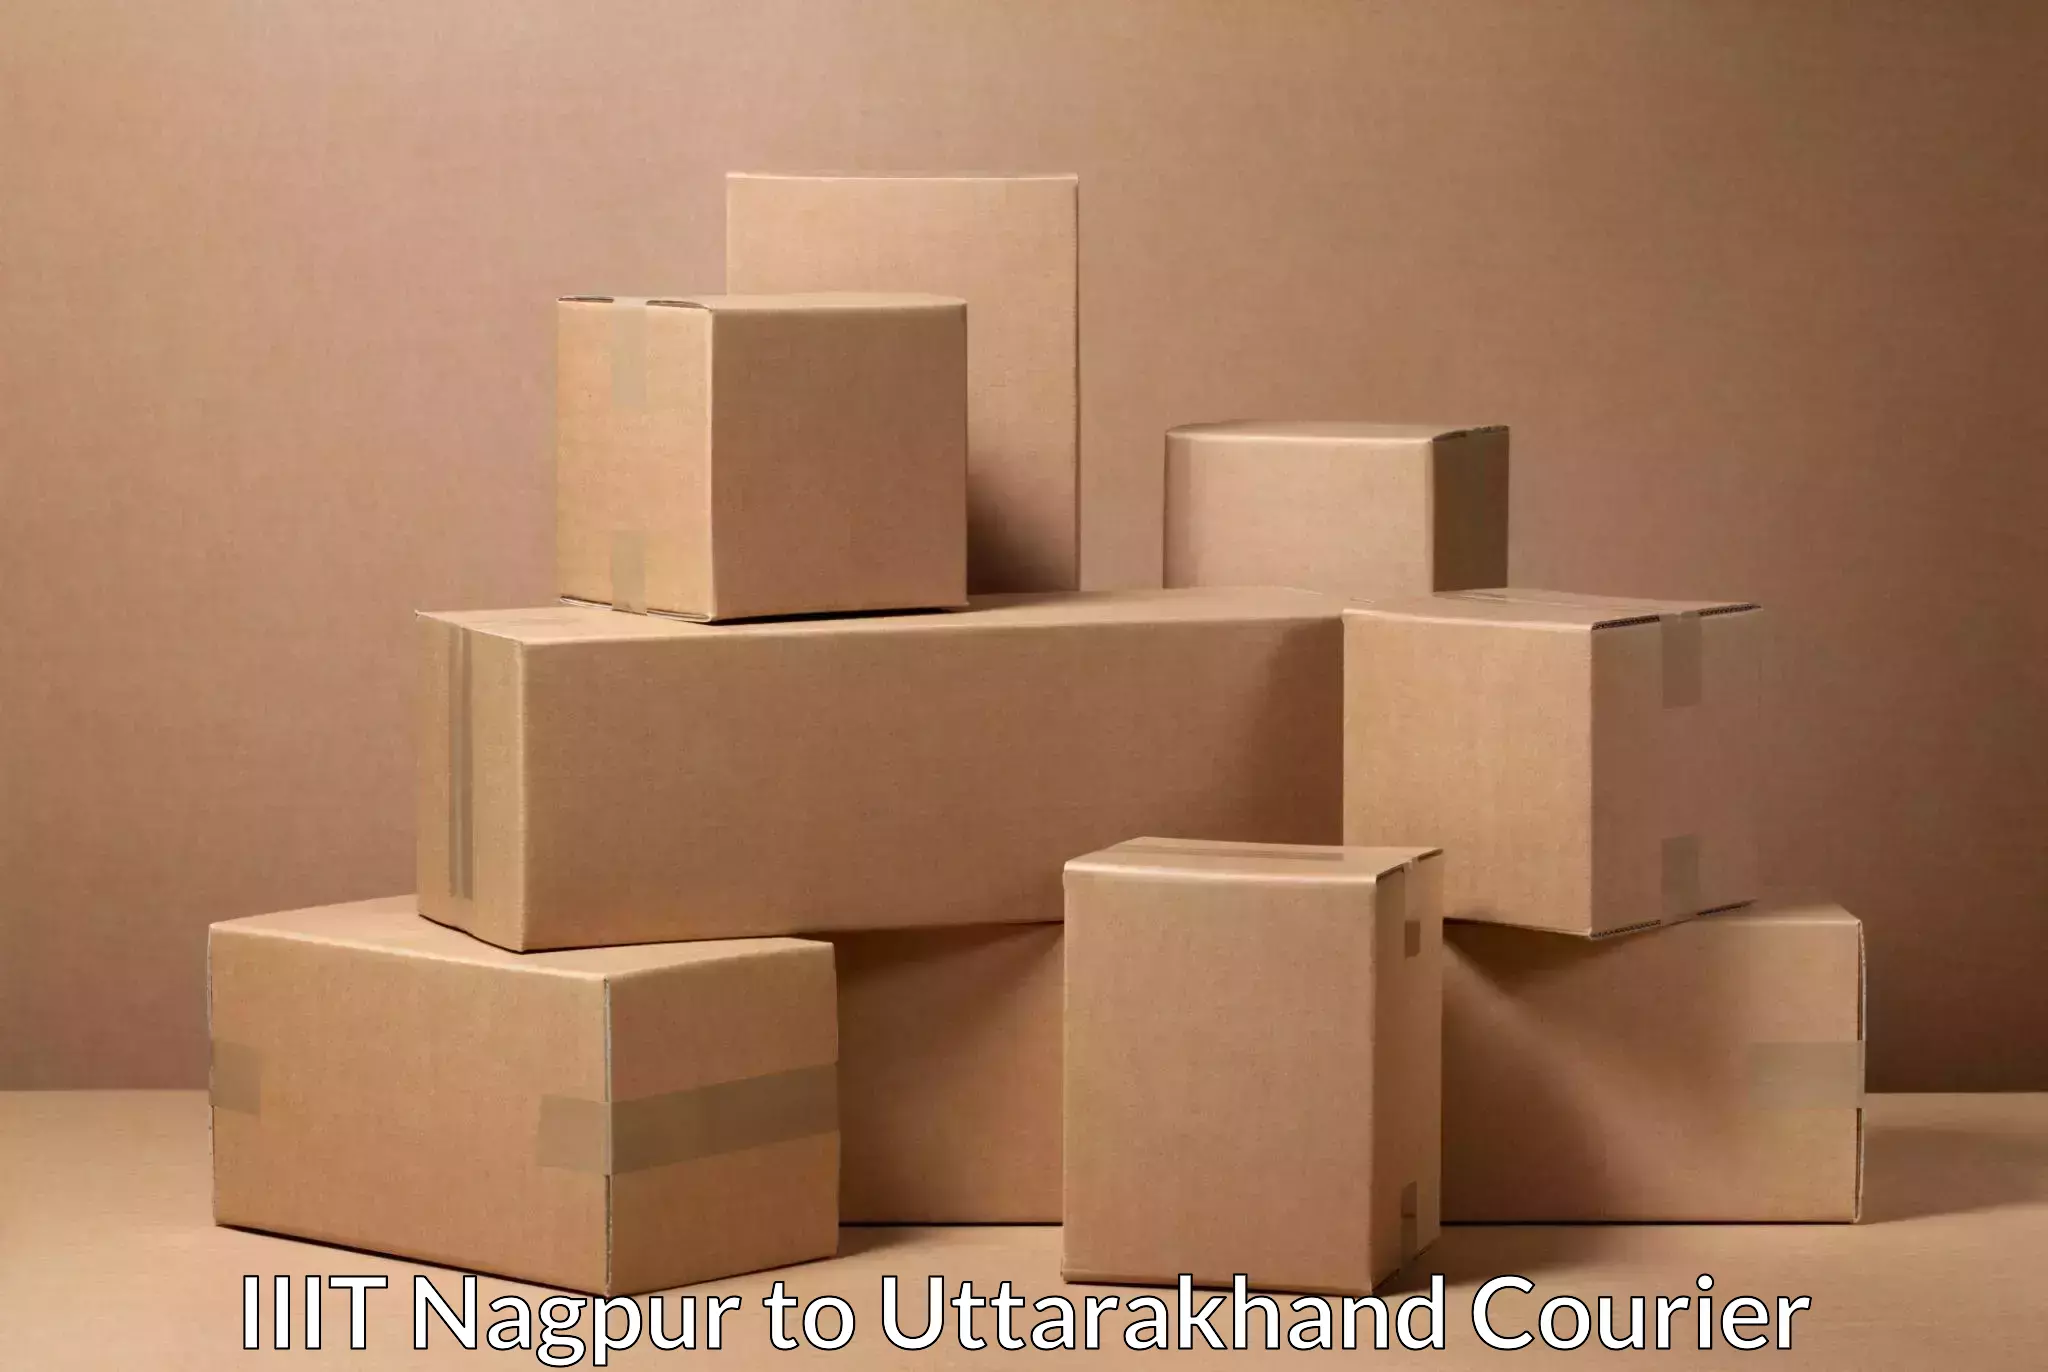 Global courier networks IIIT Nagpur to Kashipur